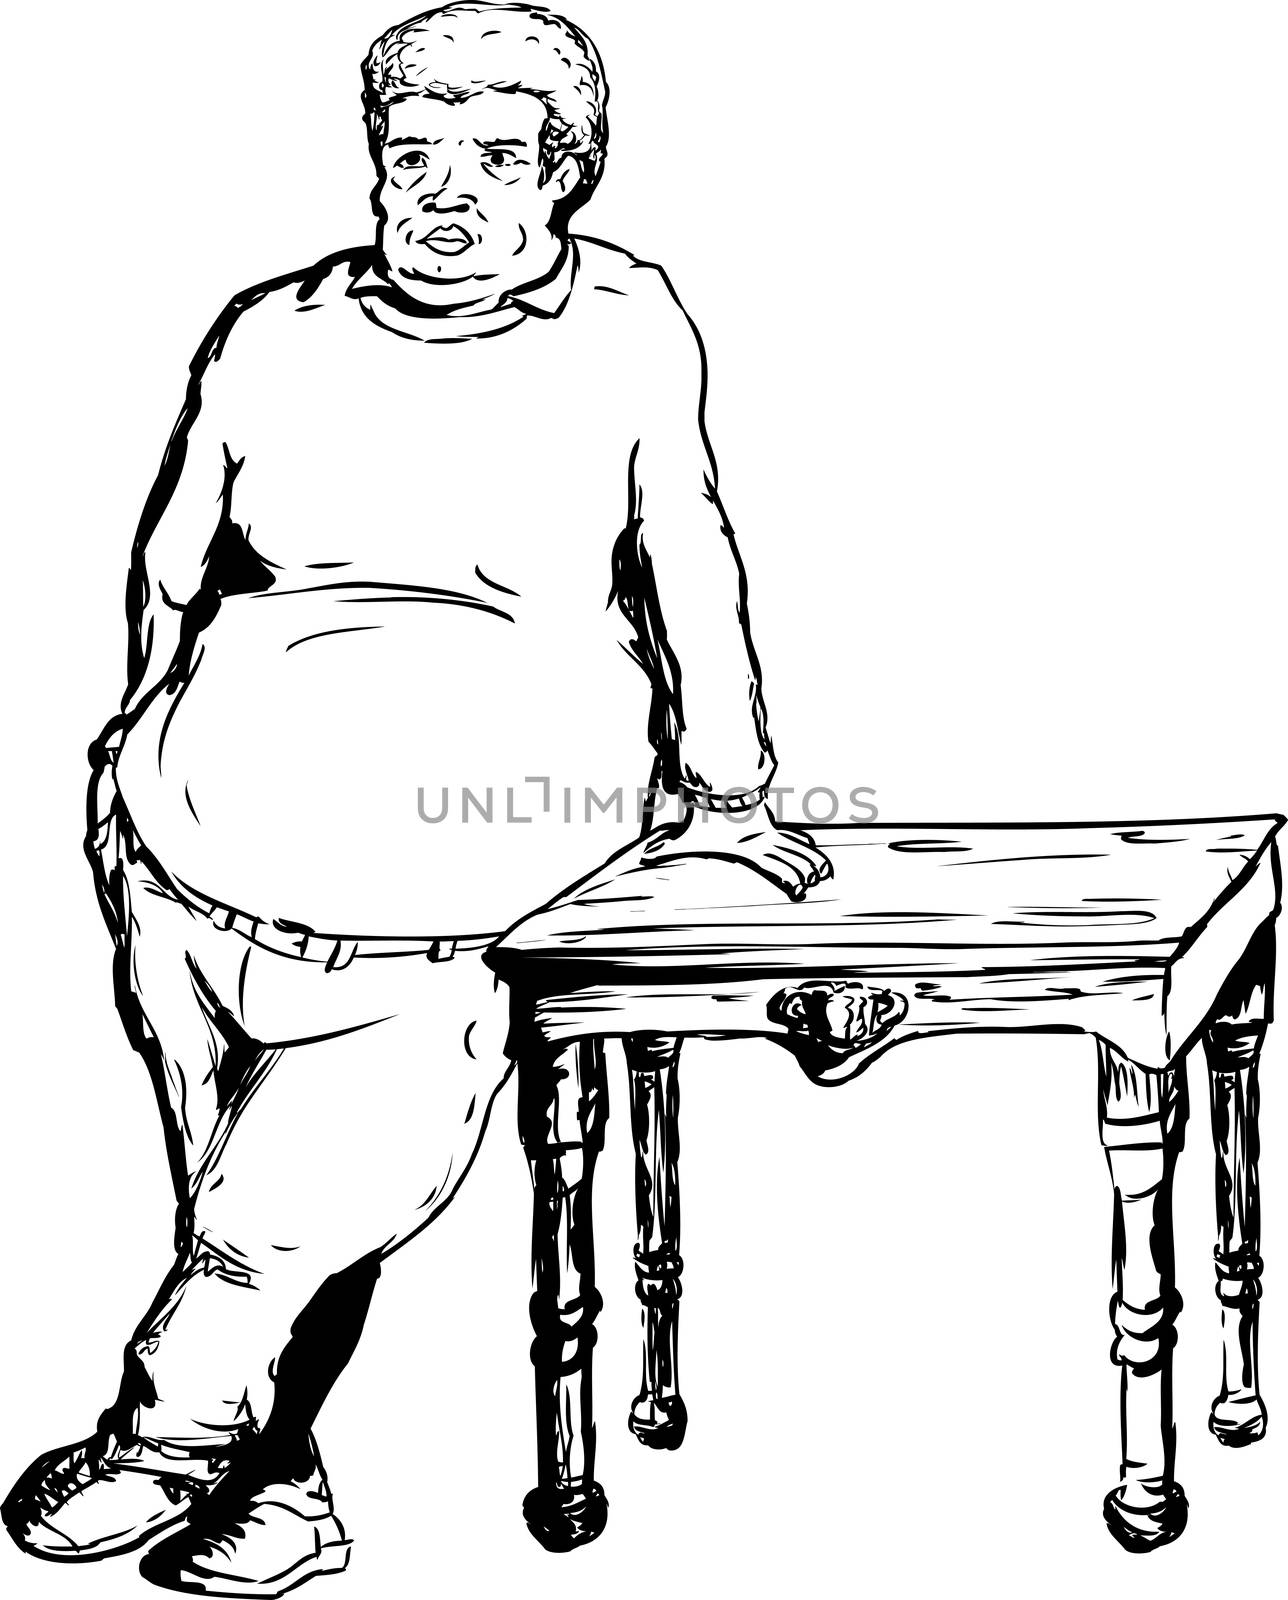 Heavy Man Leaning on Table by TheBlackRhino